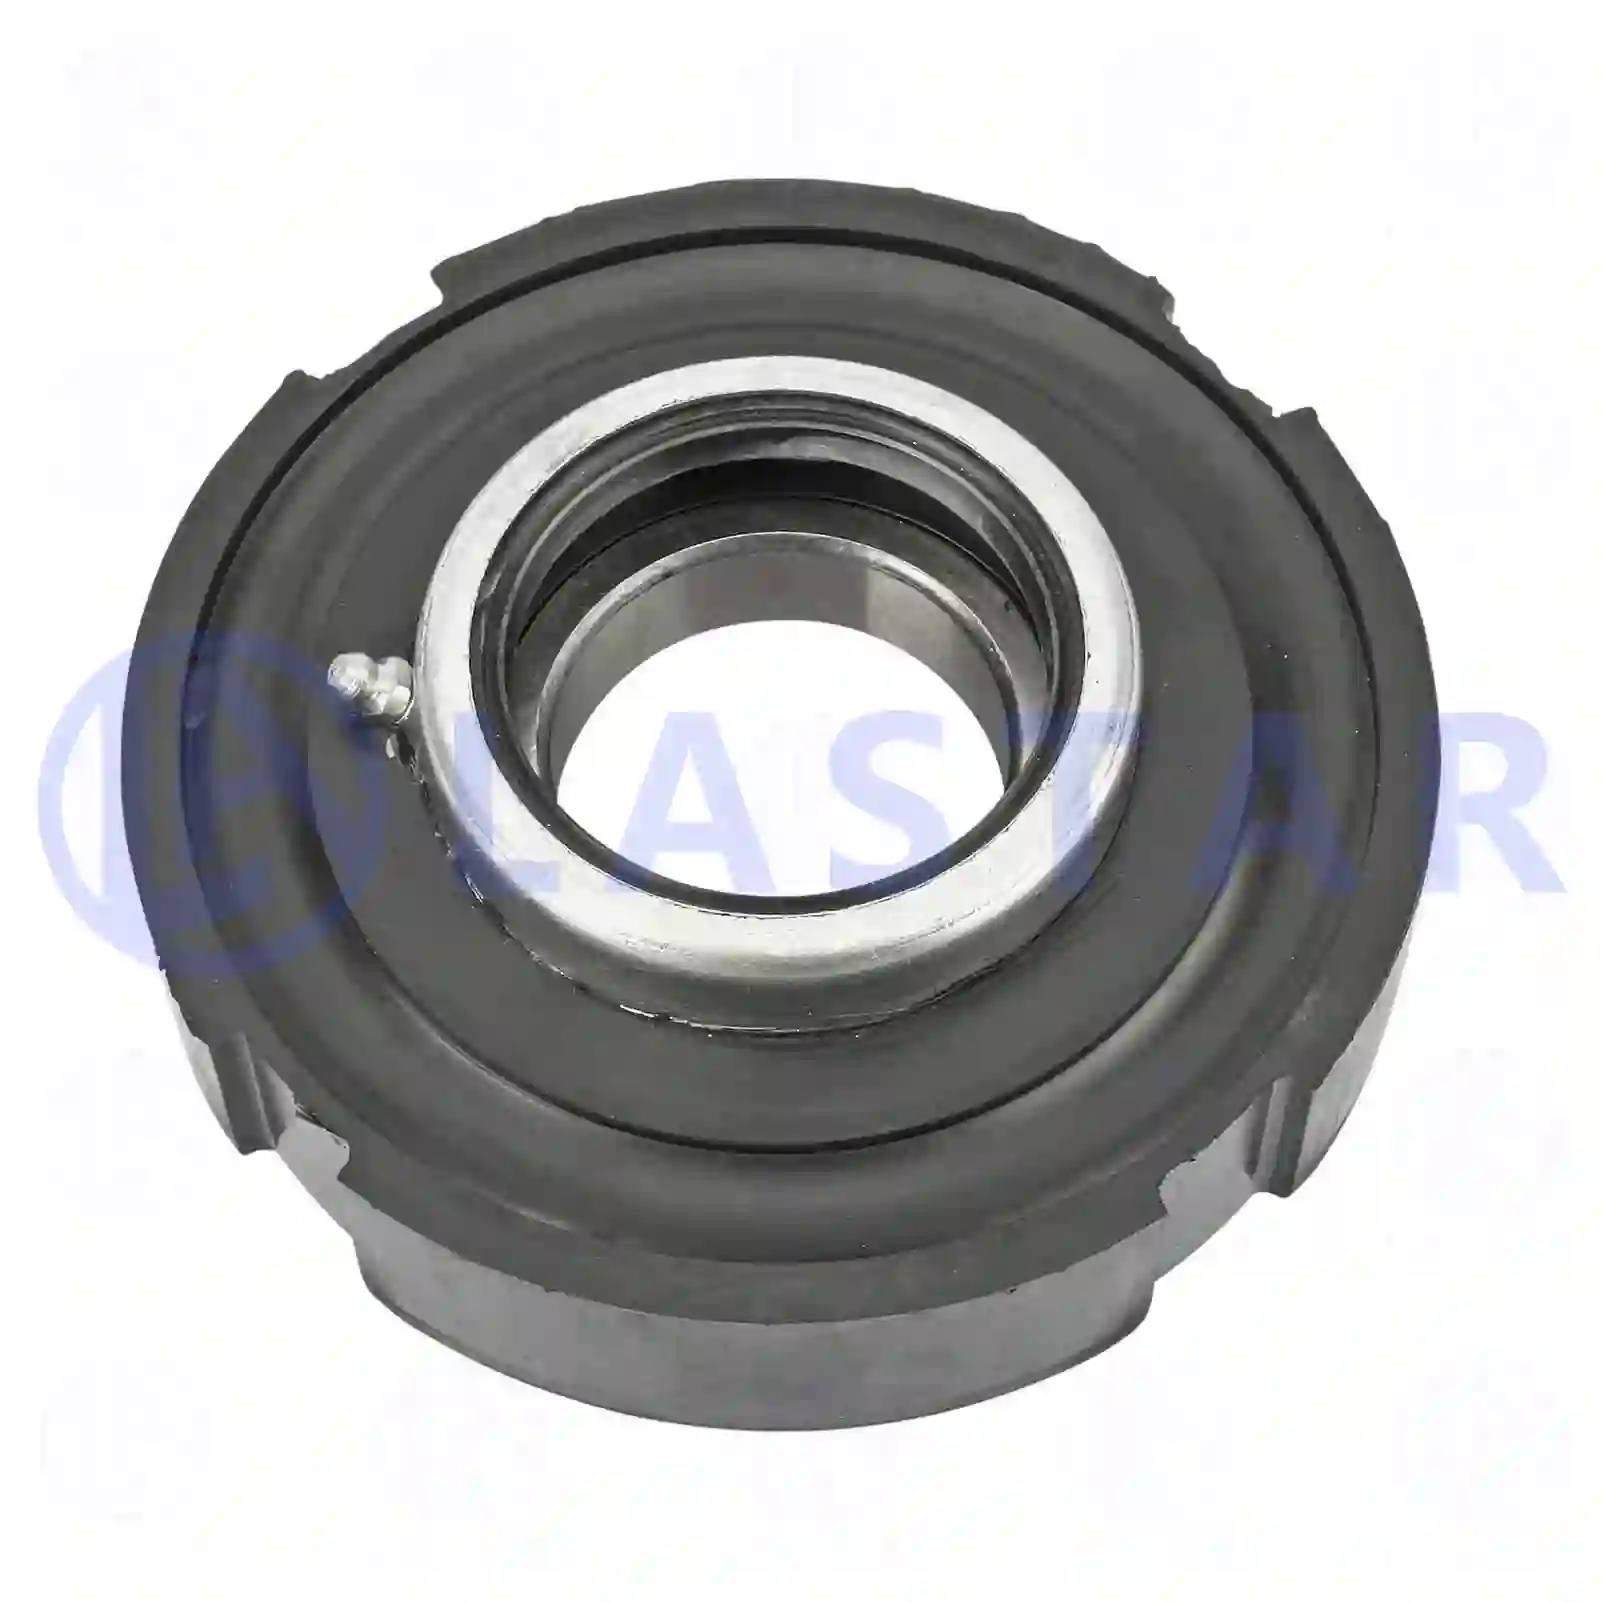 Support Bearing Center bearing, complete, la no: 77734446 ,  oem no:1113031, ZG02511-0008 Lastar Spare Part | Truck Spare Parts, Auotomotive Spare Parts